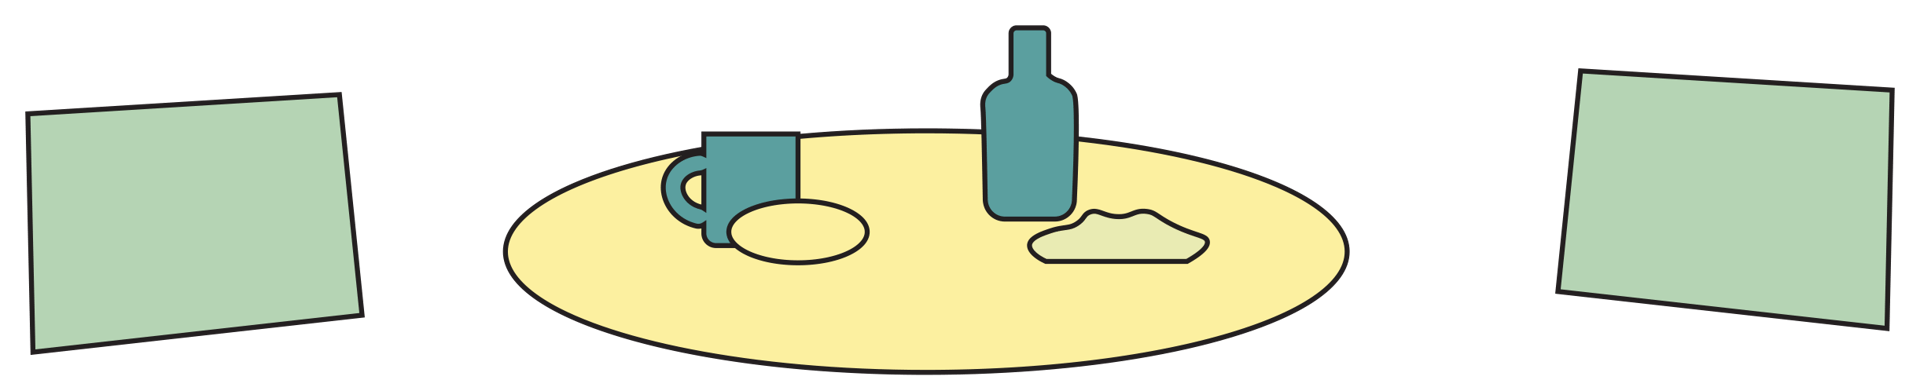 Material property, Product, Bottle, Gesture, Rectangle, Liquid, Font, Table